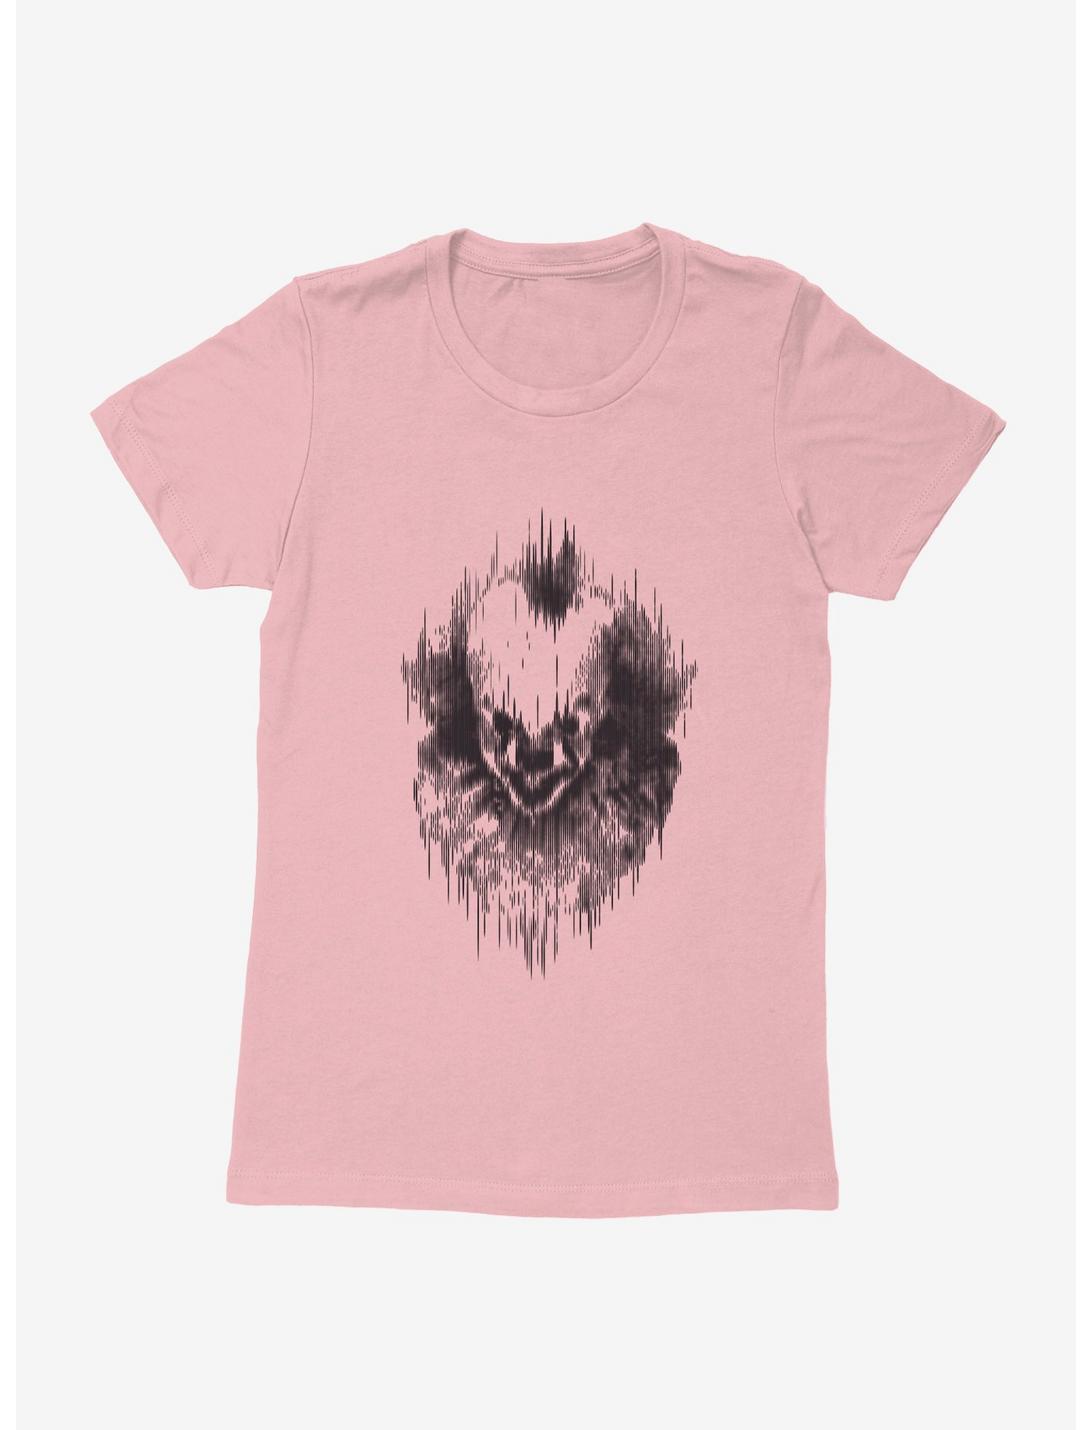 IT Chapter Two Pennywise Static Outline Womens T-Shirt, LIGHT PINK, hi-res